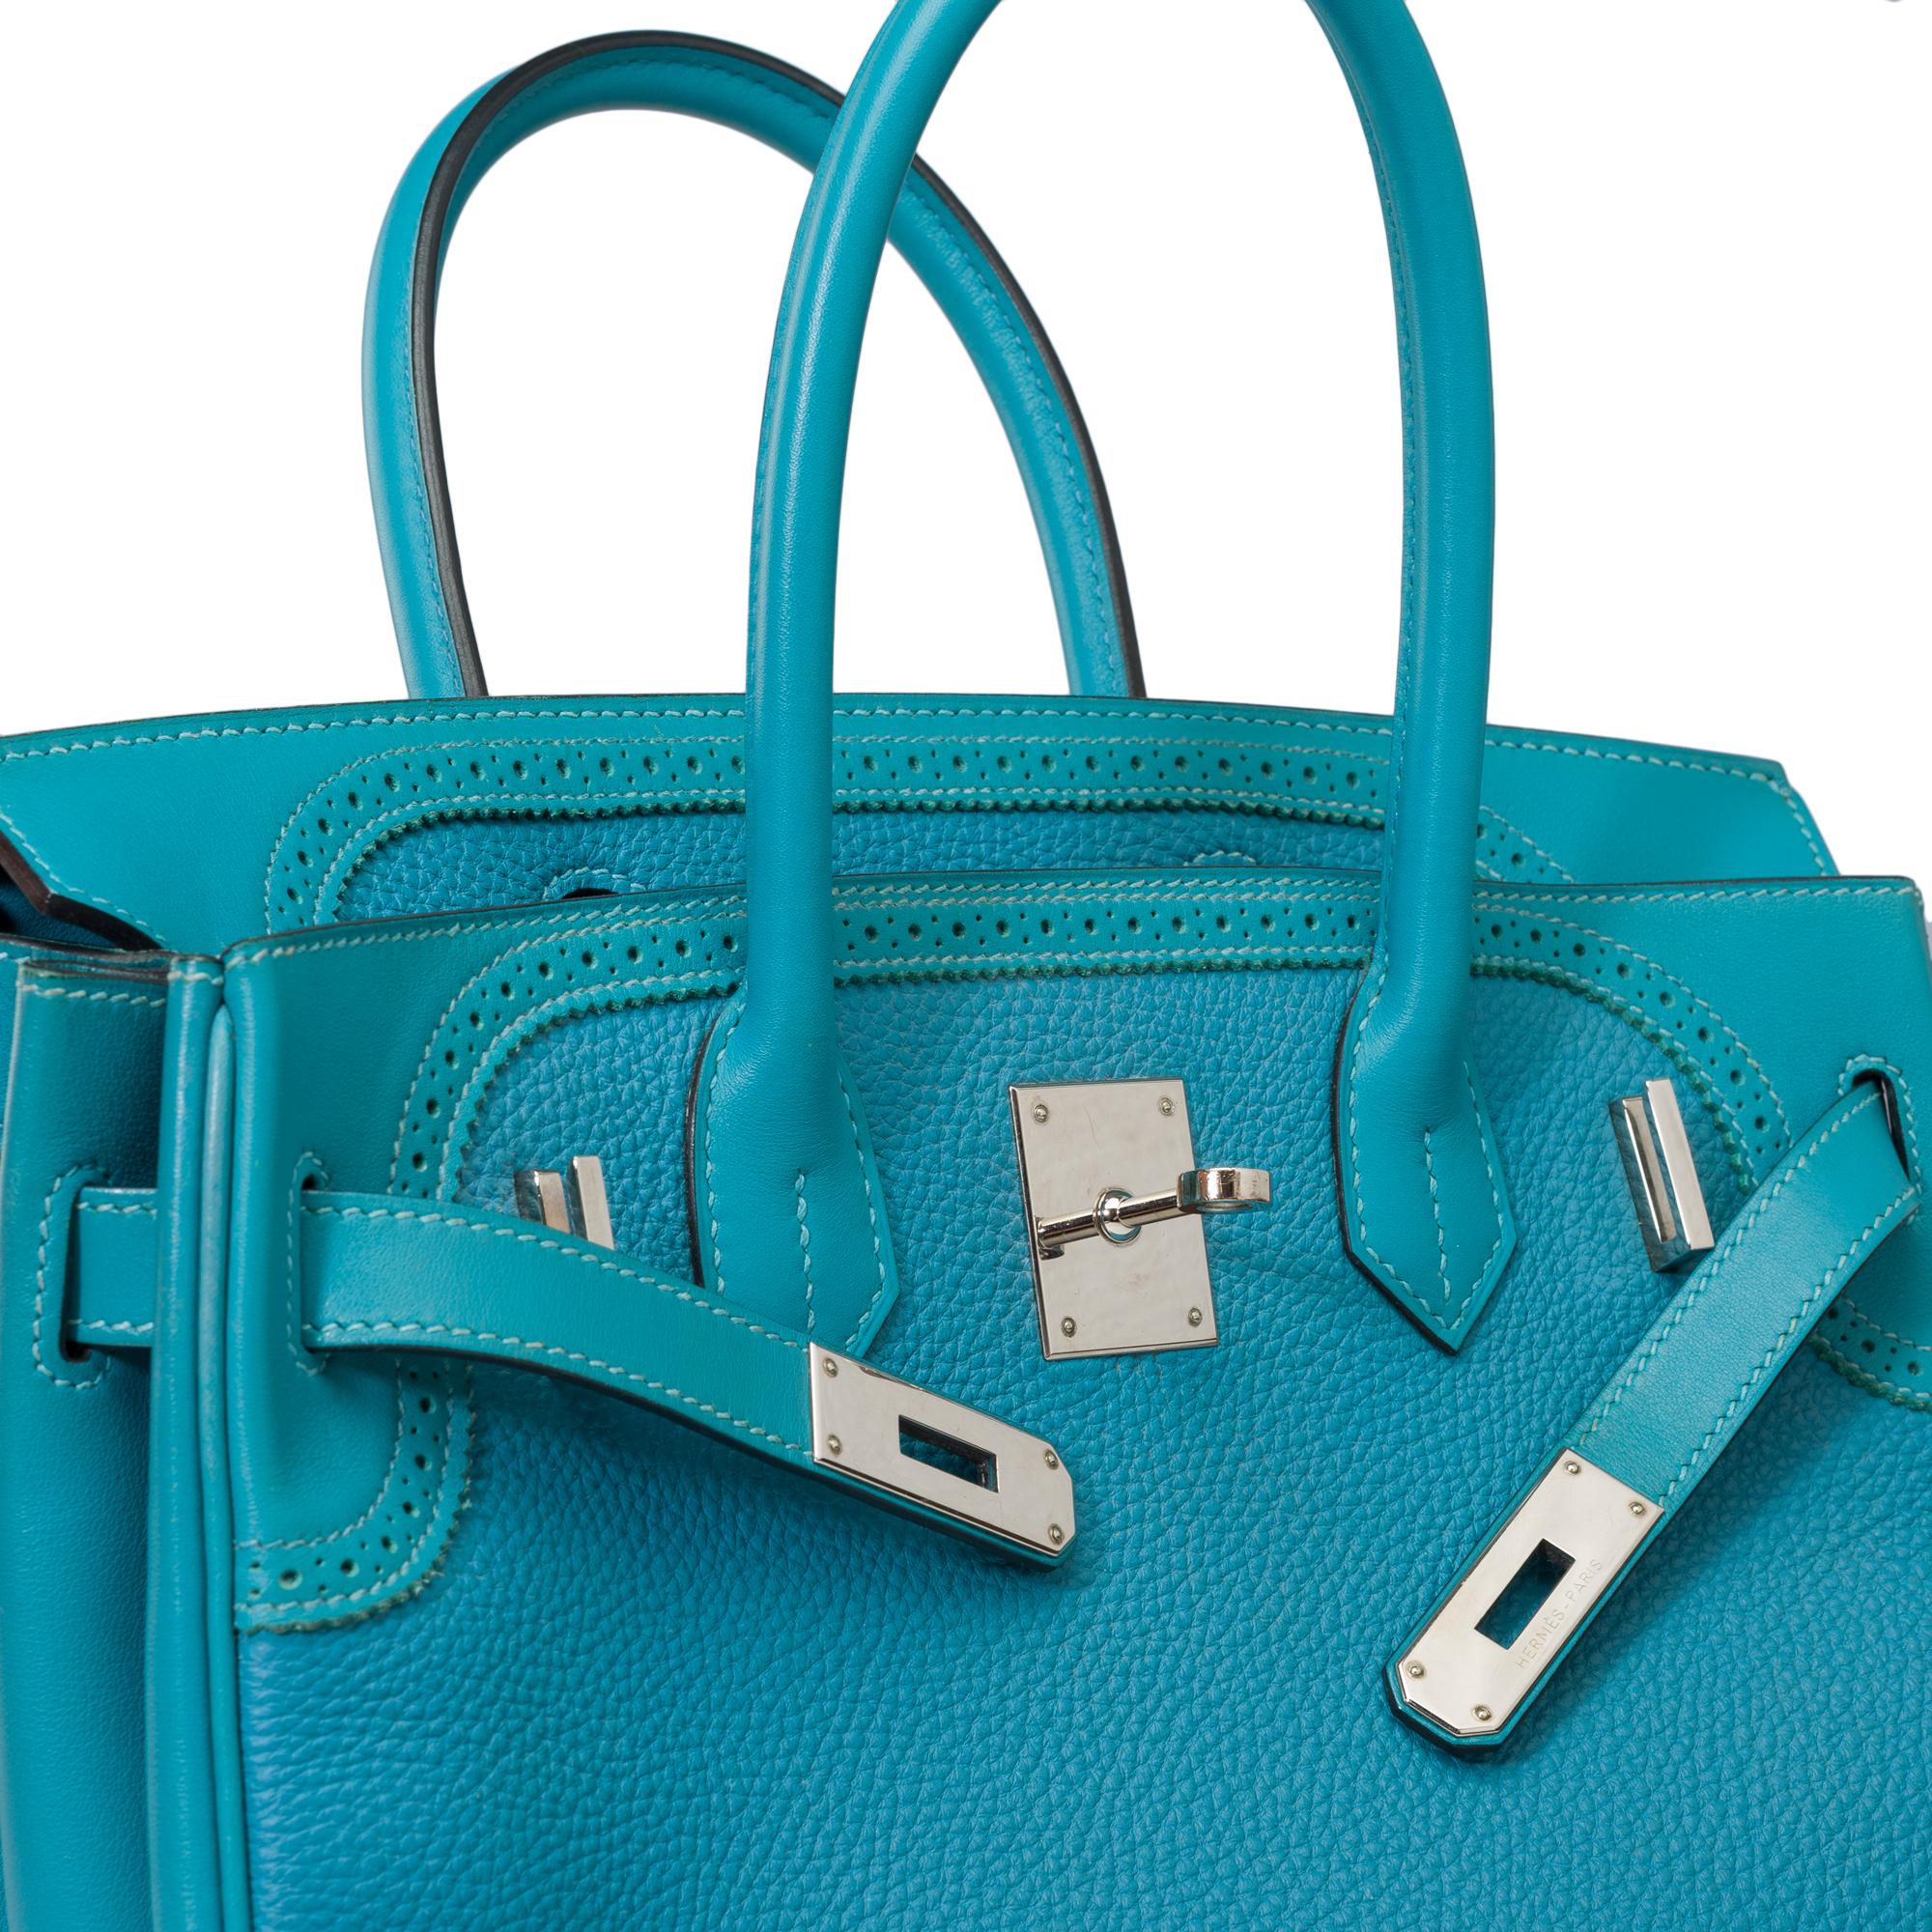 Ghillies Limited Edition Hermes Birkin 30 handbag in Turquoise Blue leather, SHW For Sale 3